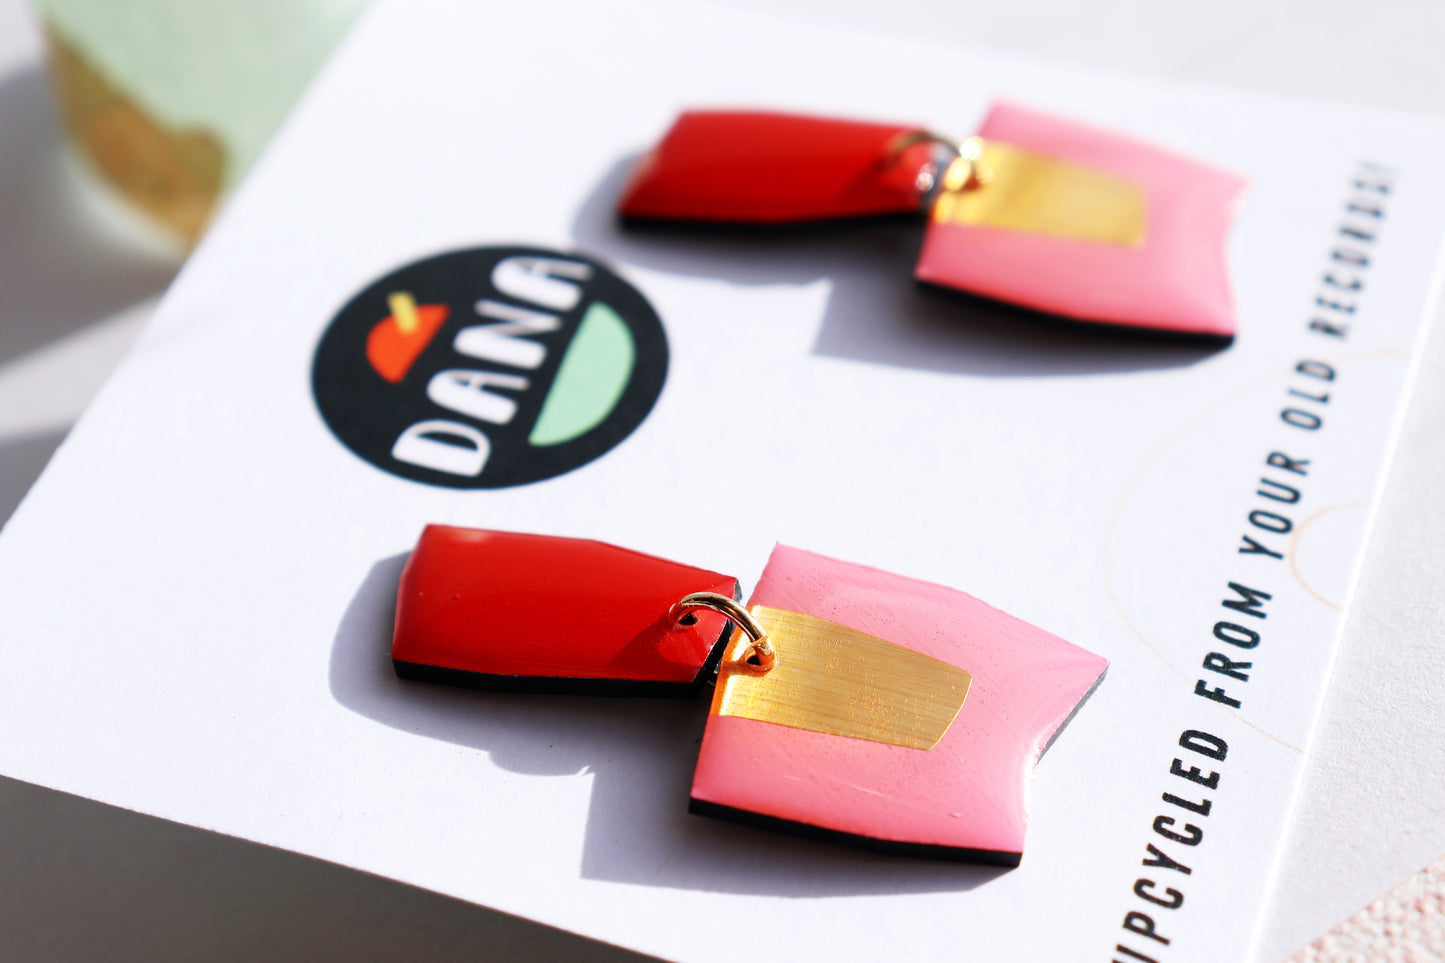 Connie no.2 / Contemporary upcycled vinyl earrings in vibrant red, candy pink and lush gold